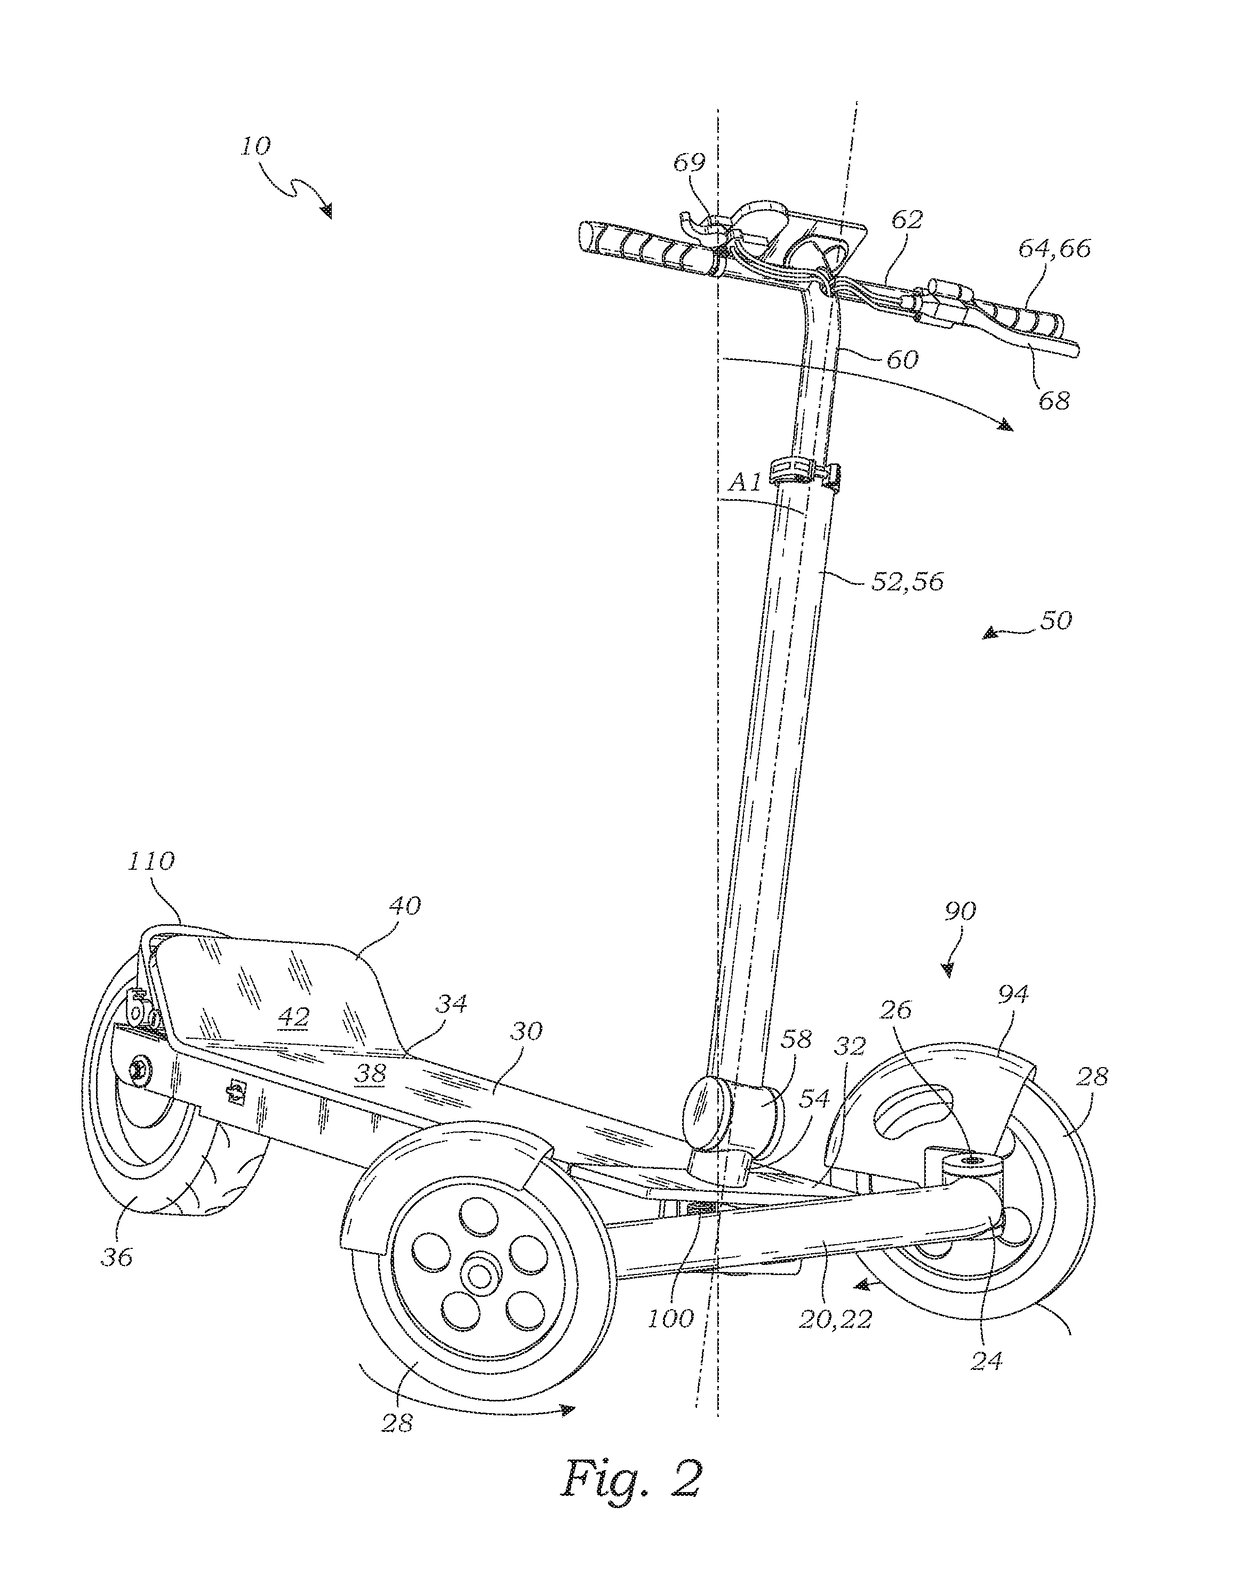 Scooter and steering system